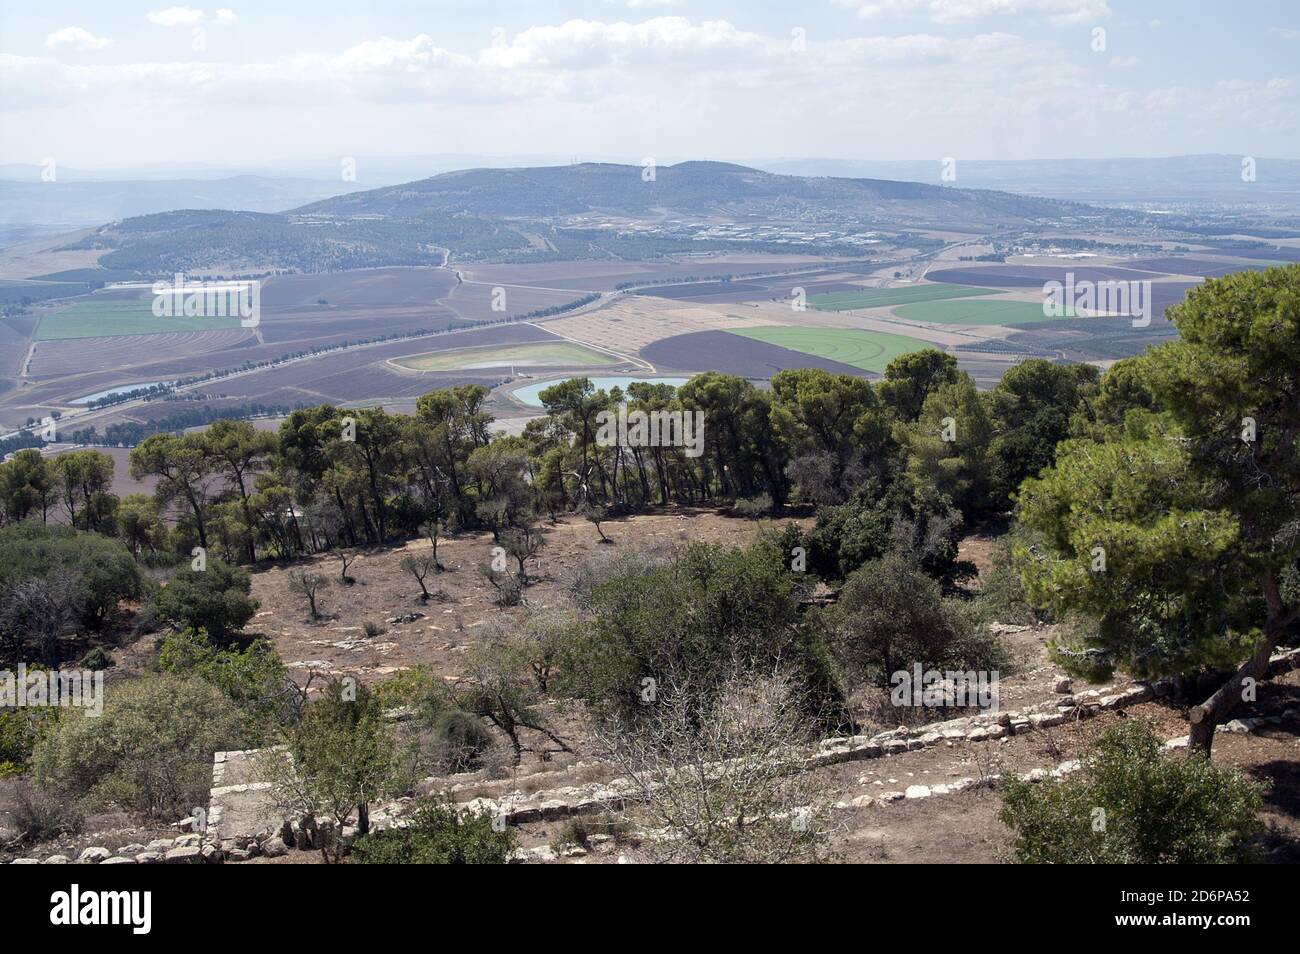 Góra Tabor, Mount Tabor הר תבור Har Tavor; Israel, Izrael, ישראל; View of the Lower Galilee farmland from Mount Tabor. A typical landscape of Galilee Stock Photo